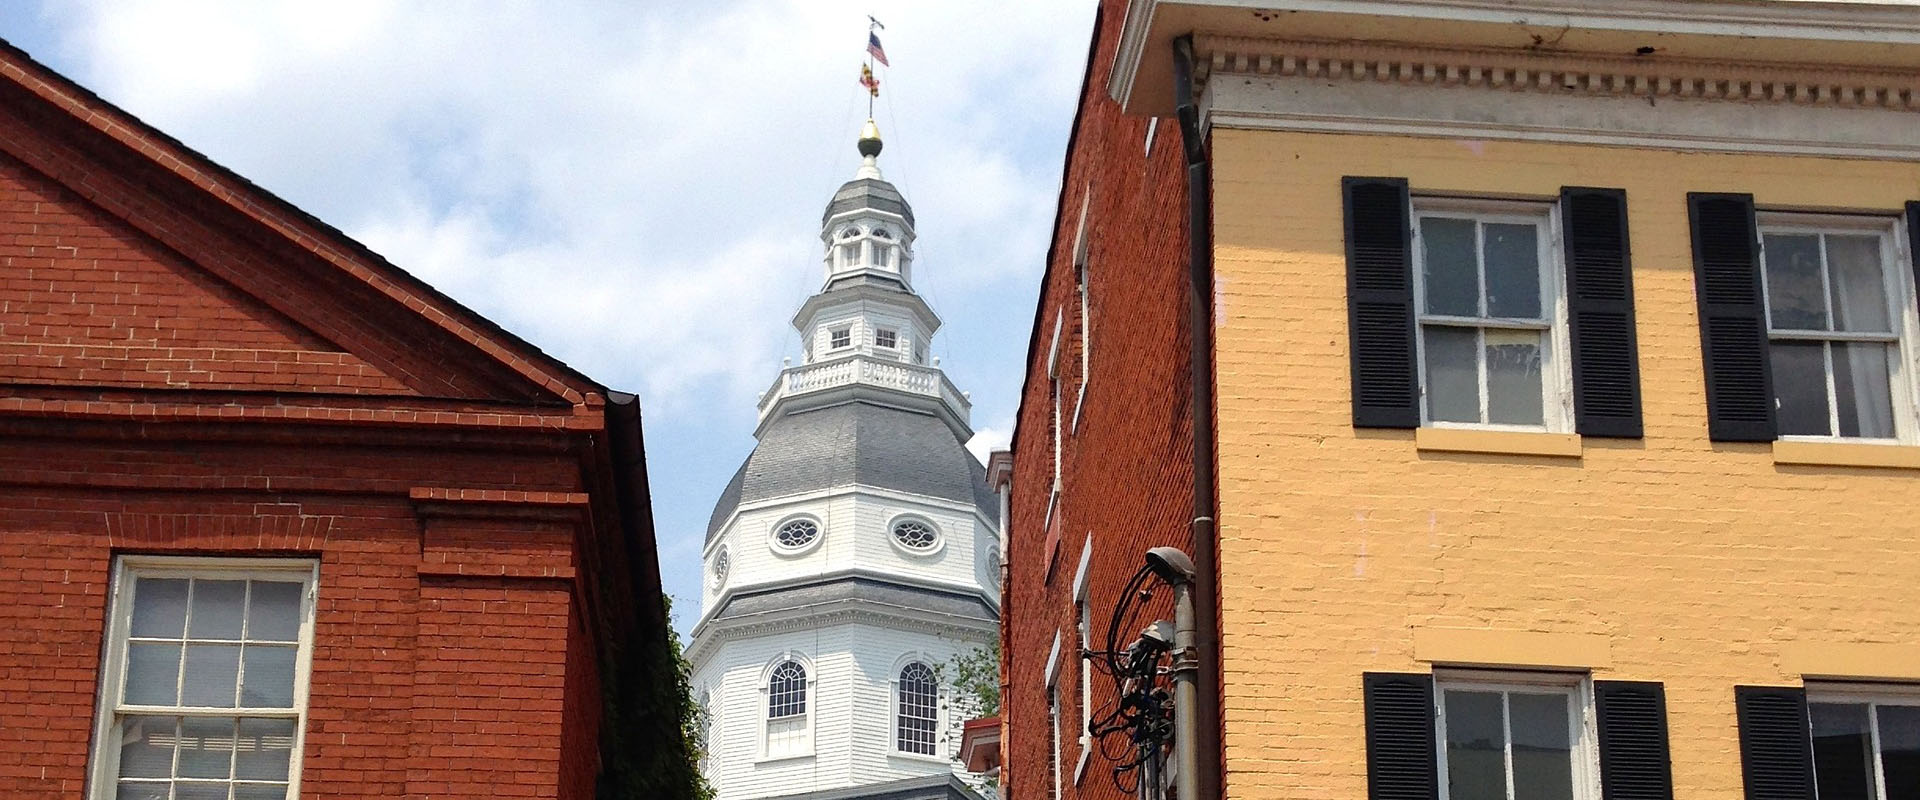 Downtown Annapolis capital building, two brick buildings on either side.